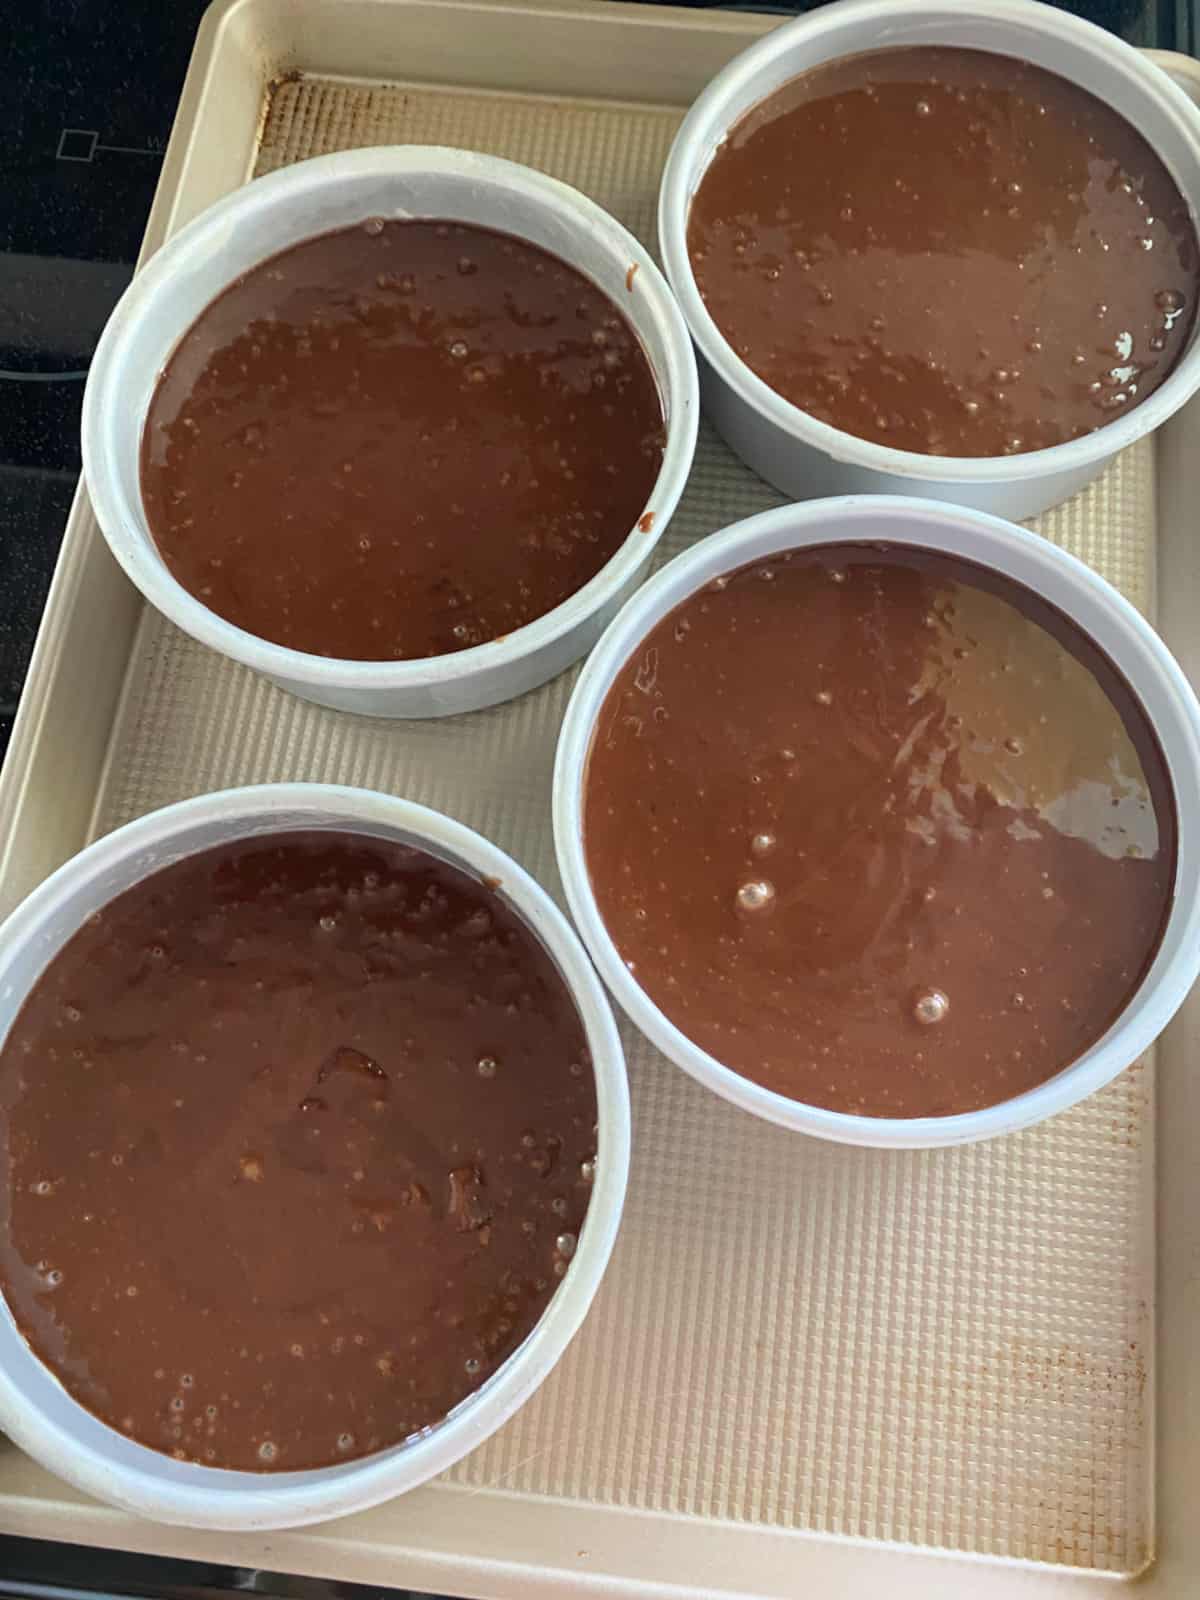 Chocolate cake batter in four cake pans.